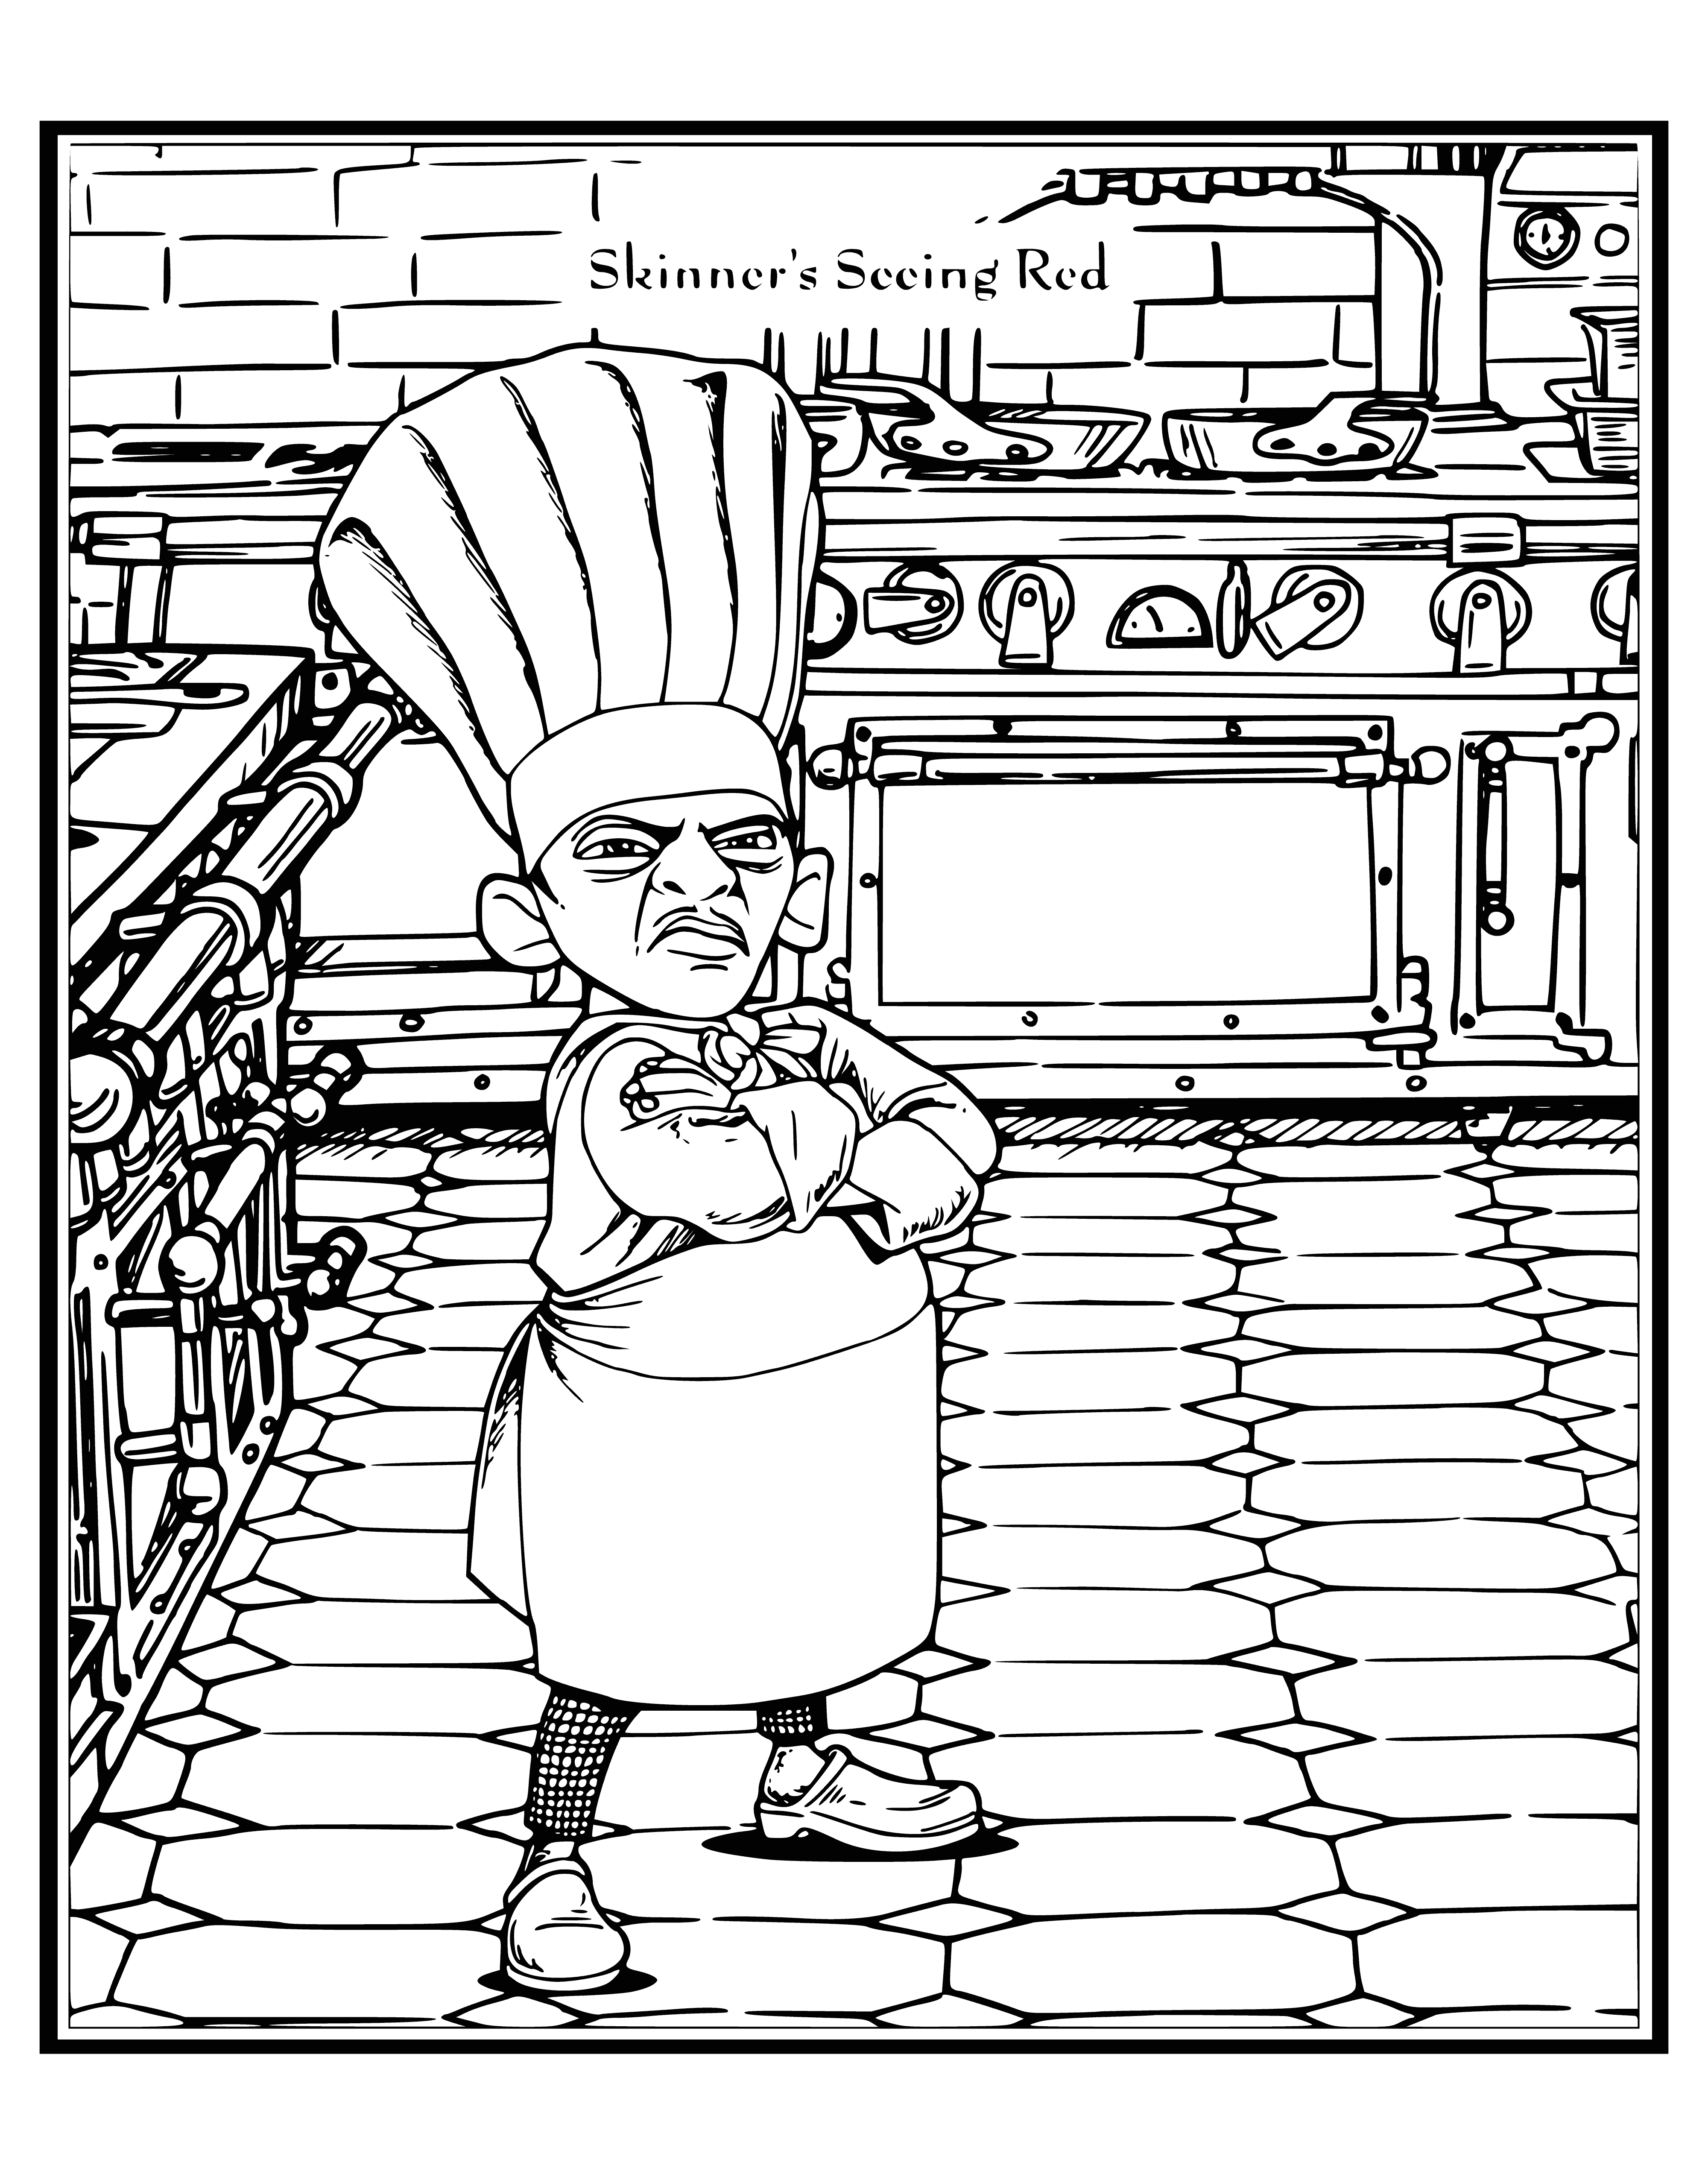 coloring page: A rat in a chef outfit holds a spoon & whisk, smirking. A stove w/ veg in a pot behind him tells the tale of Ratatouille.